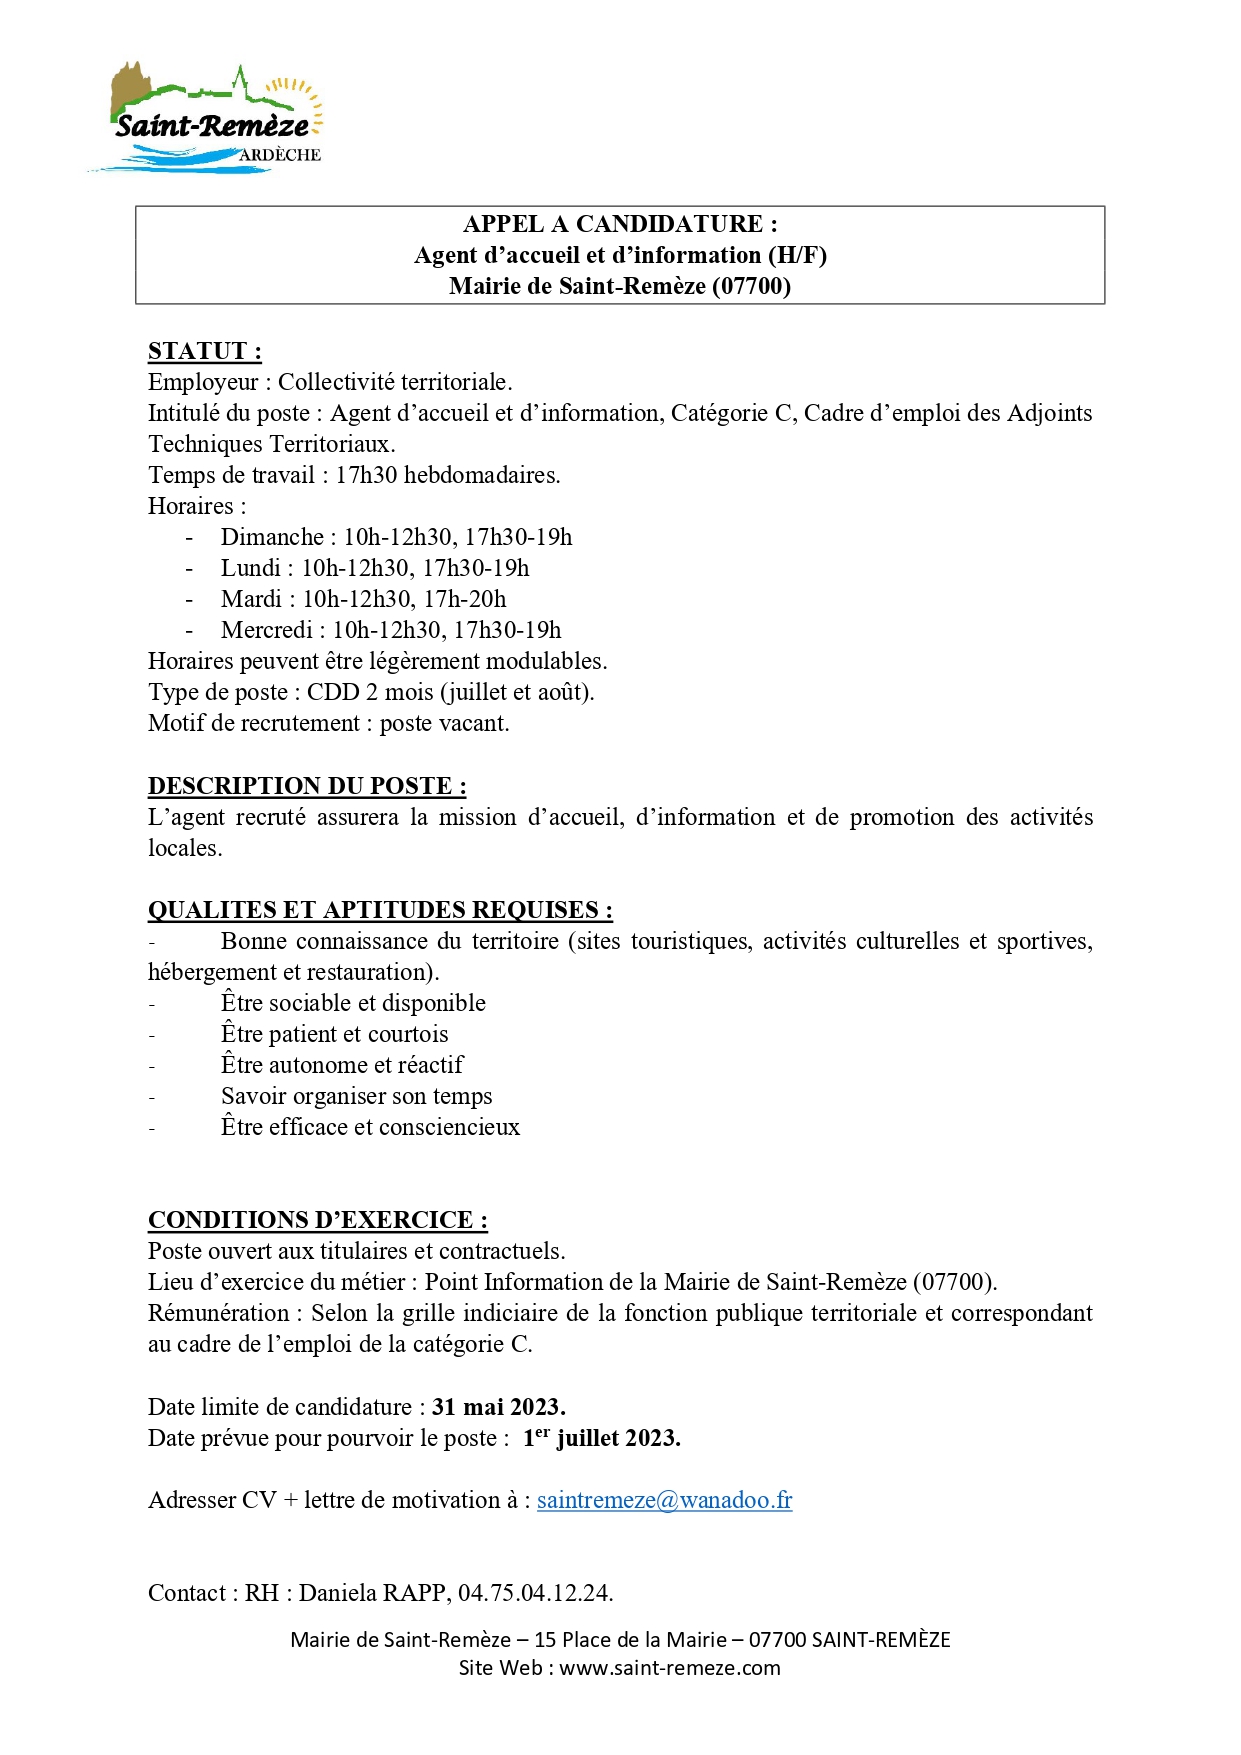 Appel a candidature point info page 00011